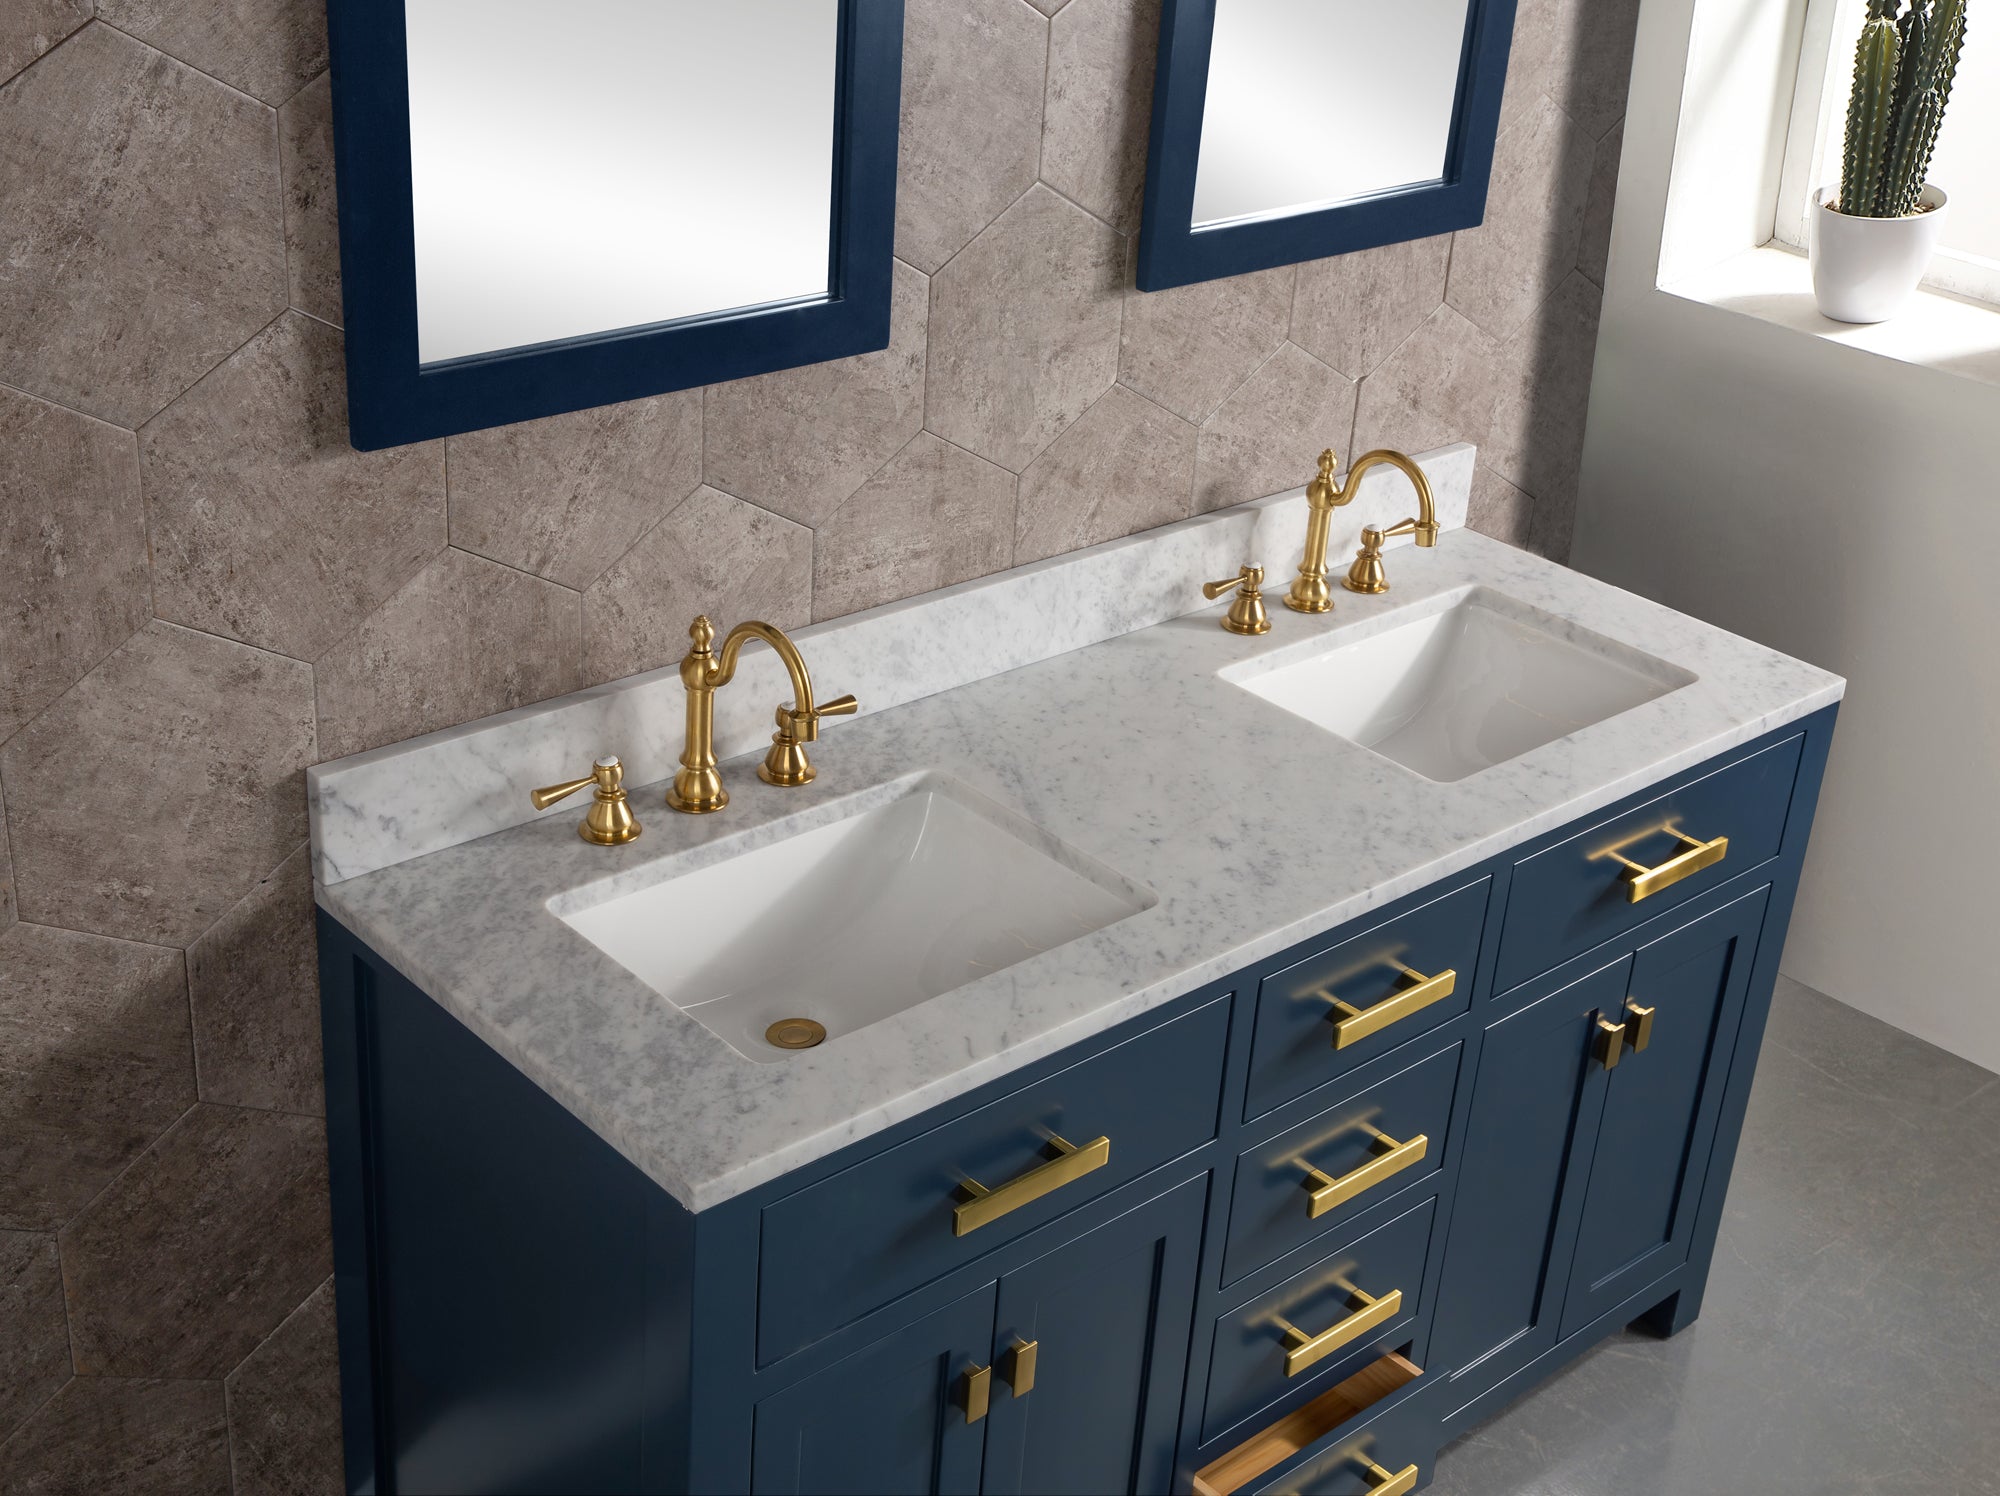 Water Creation | Madison 60-Inch Double Sink Carrara White Marble Vanity In Monarch Blue | MS60CW06MB-000000000